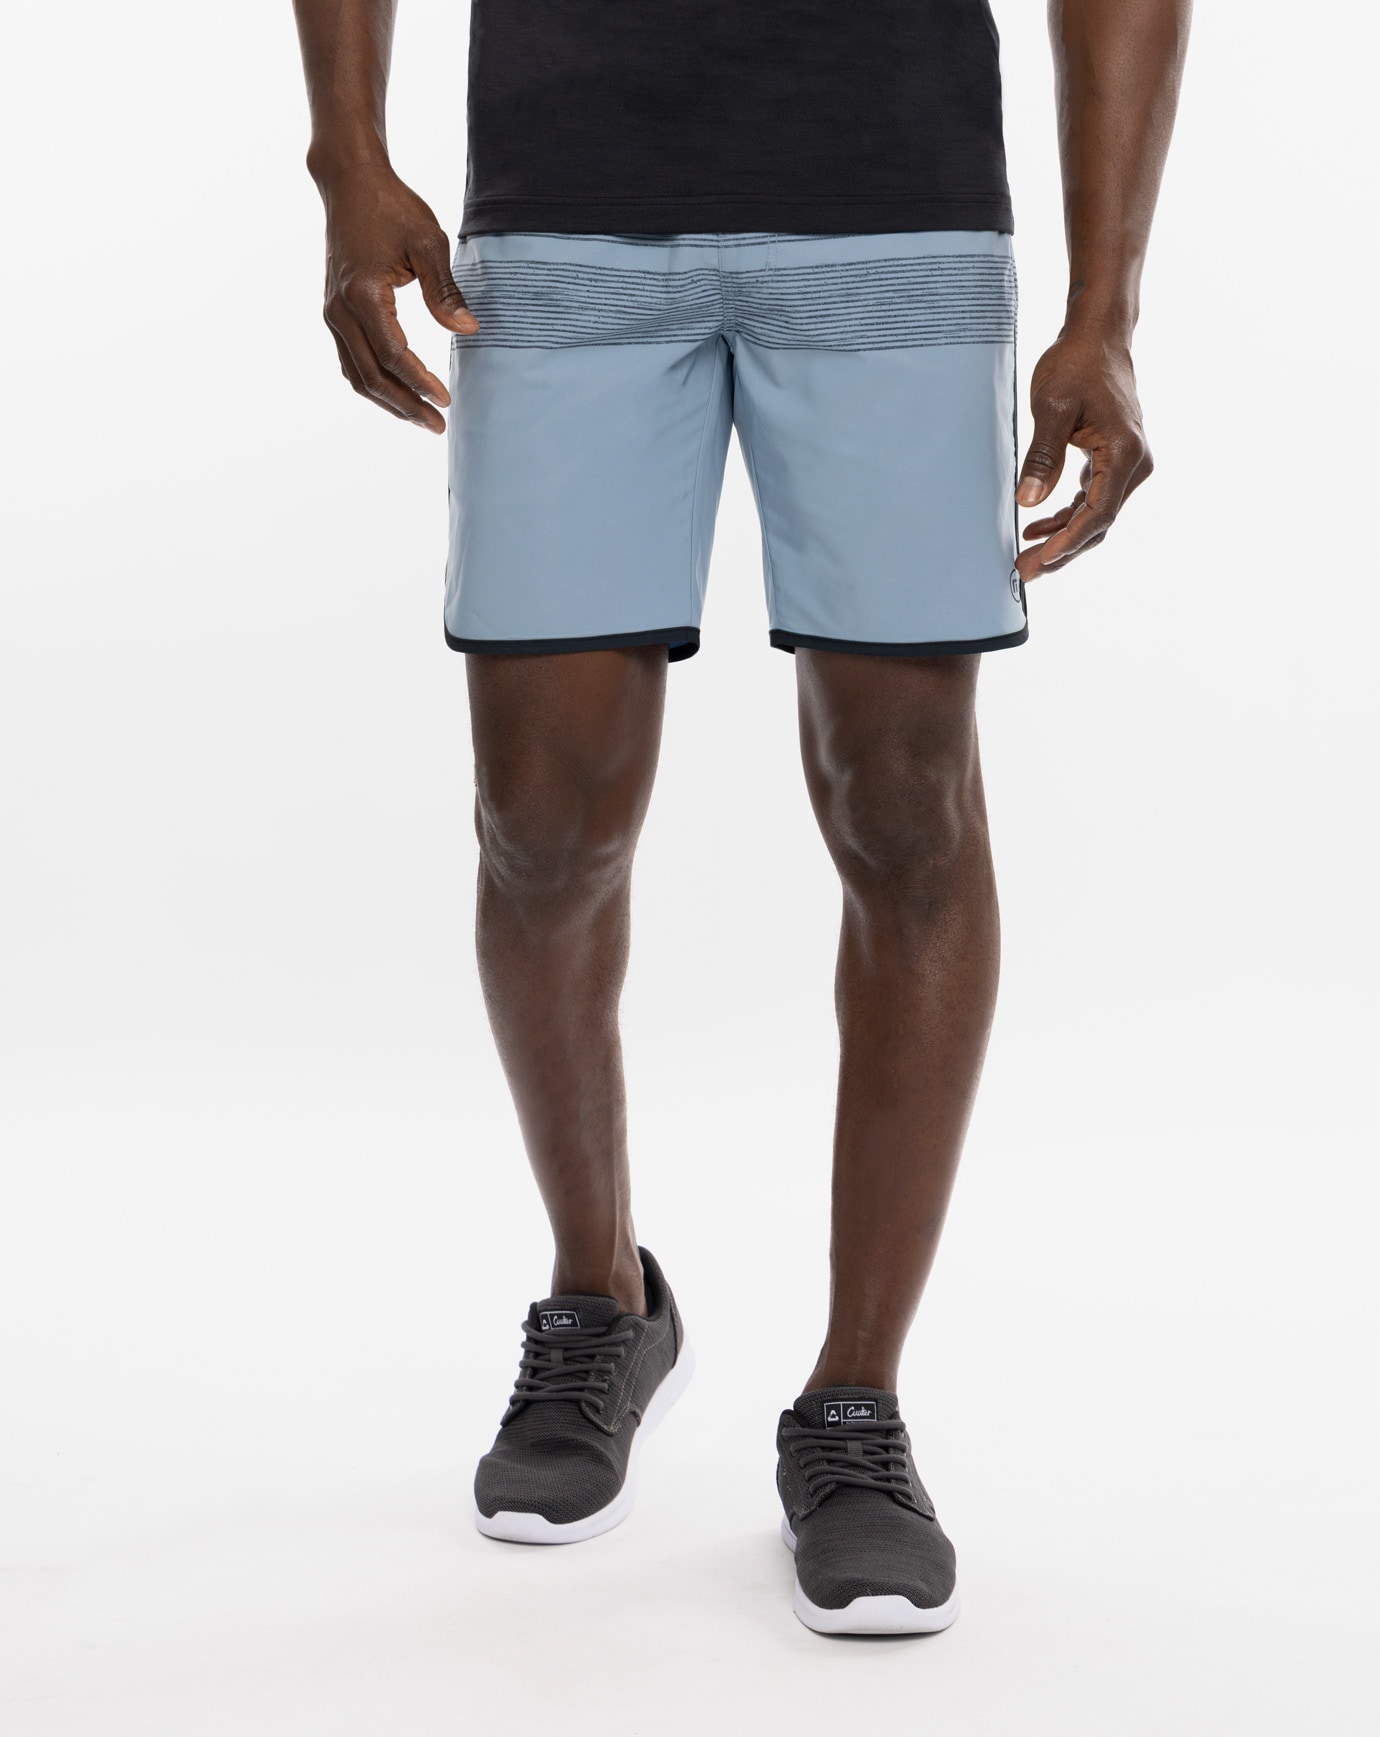 Related Product - EASY GOING ACTIVE SHORT